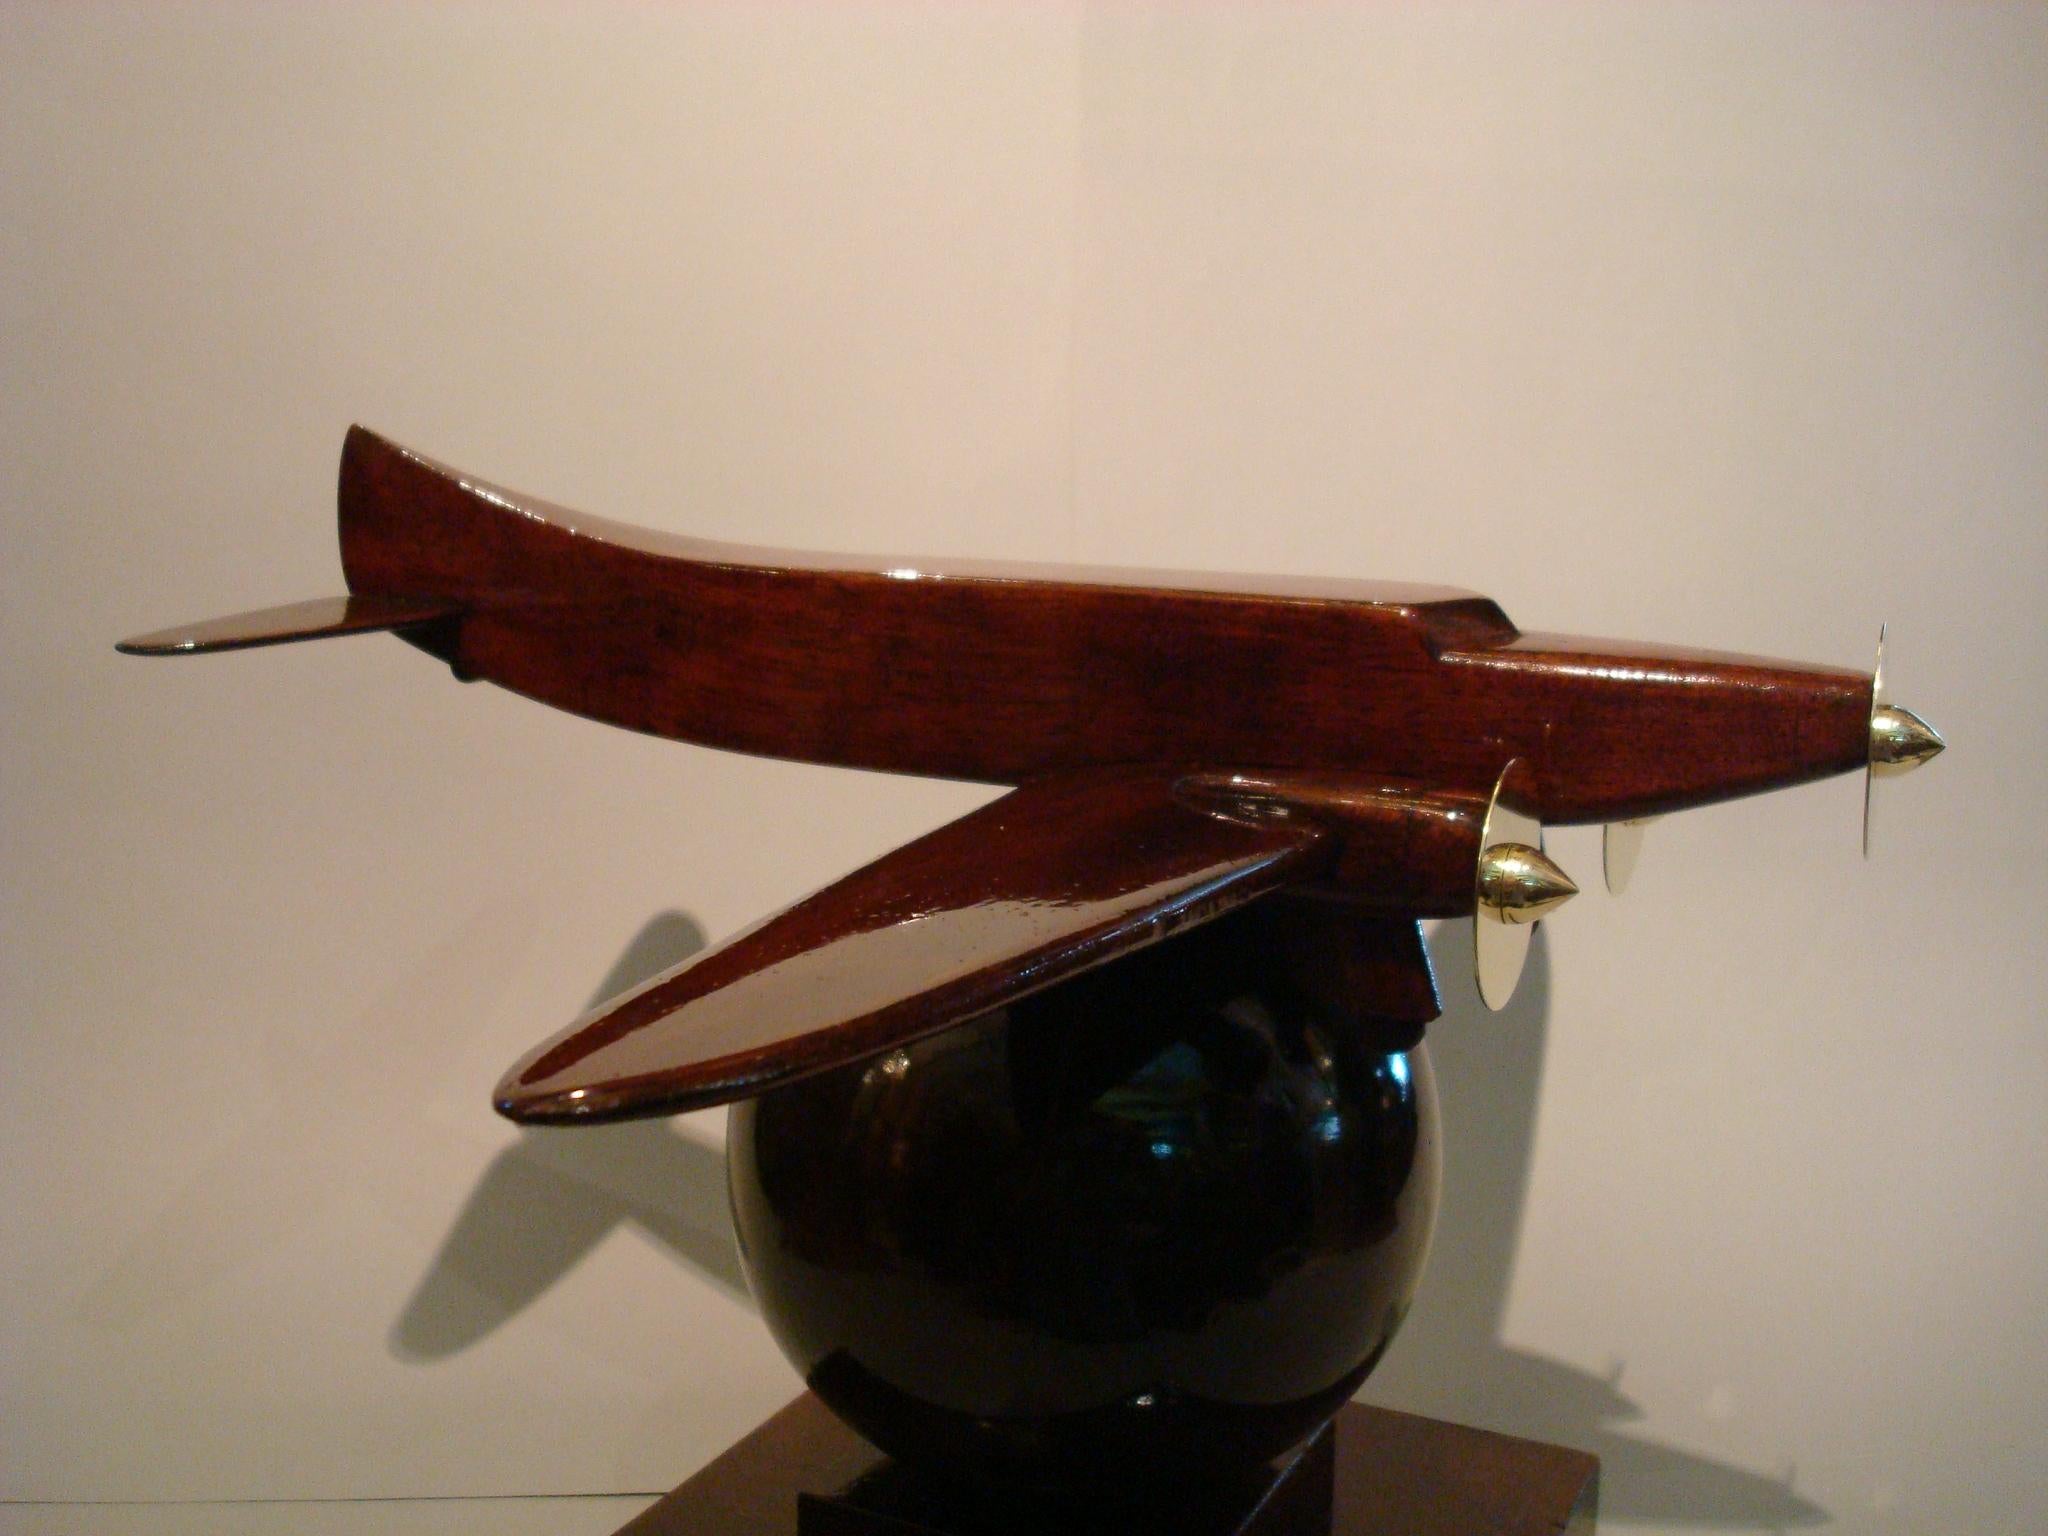 Art Deco Wooden Airplane Model of a Couzinet 2